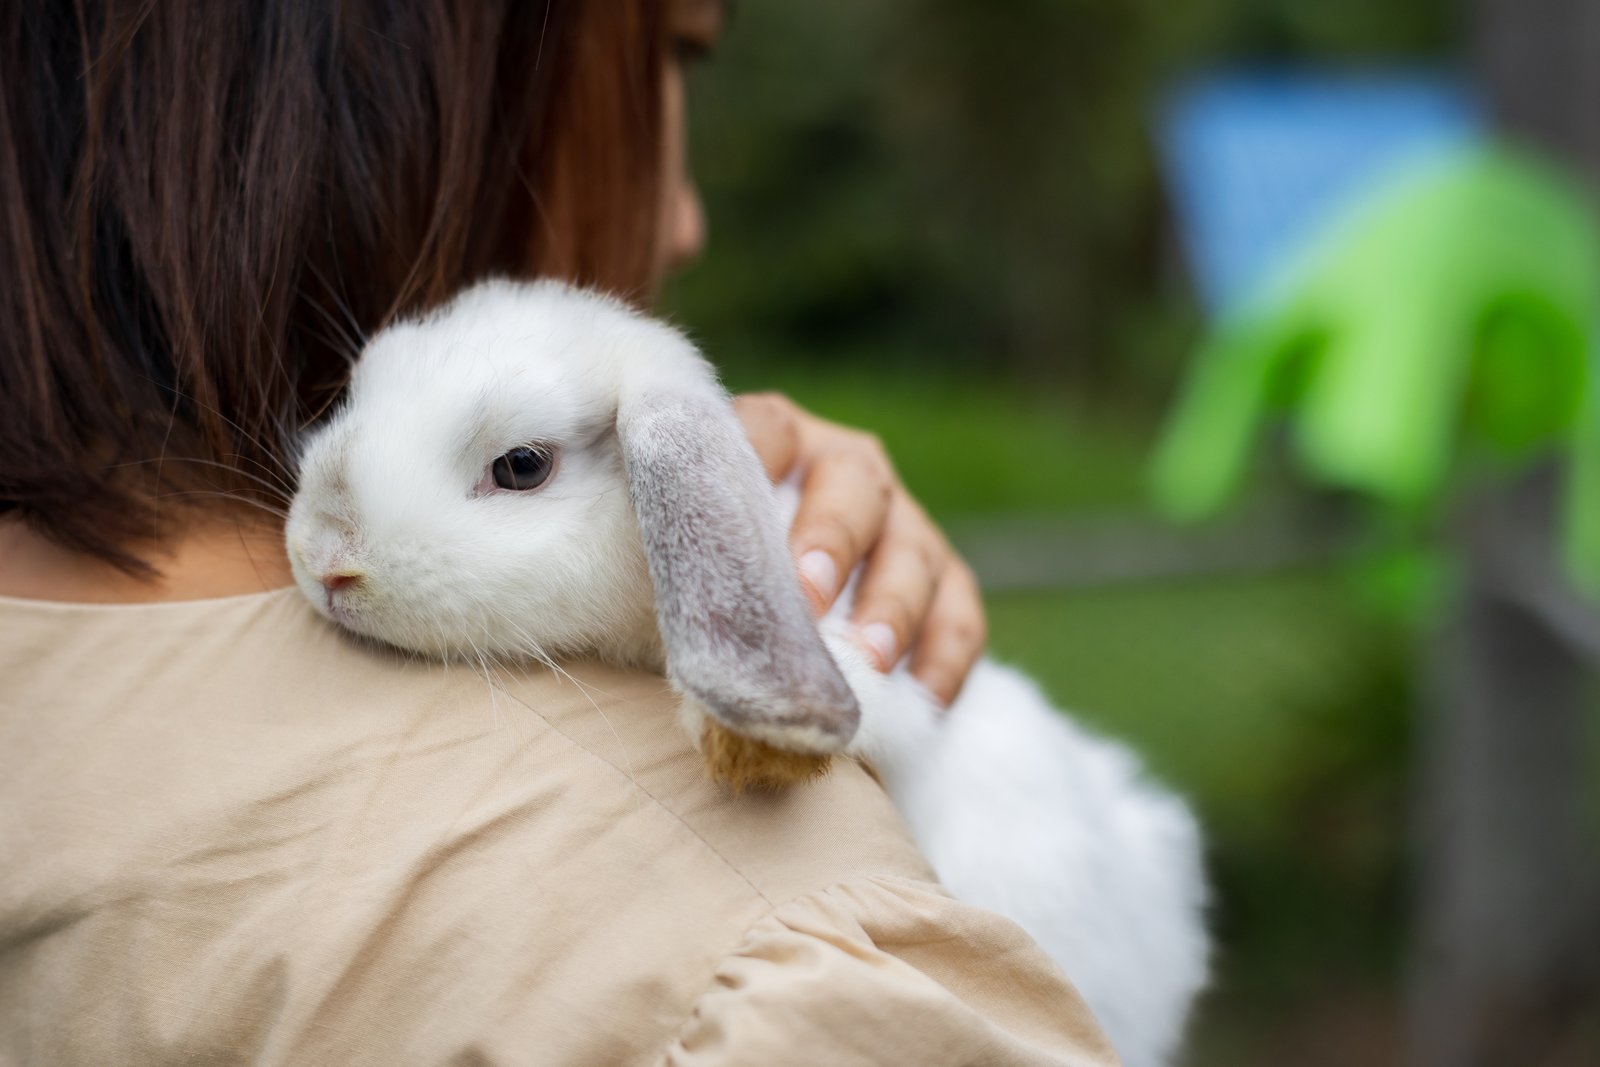 A woman carrying a bunny